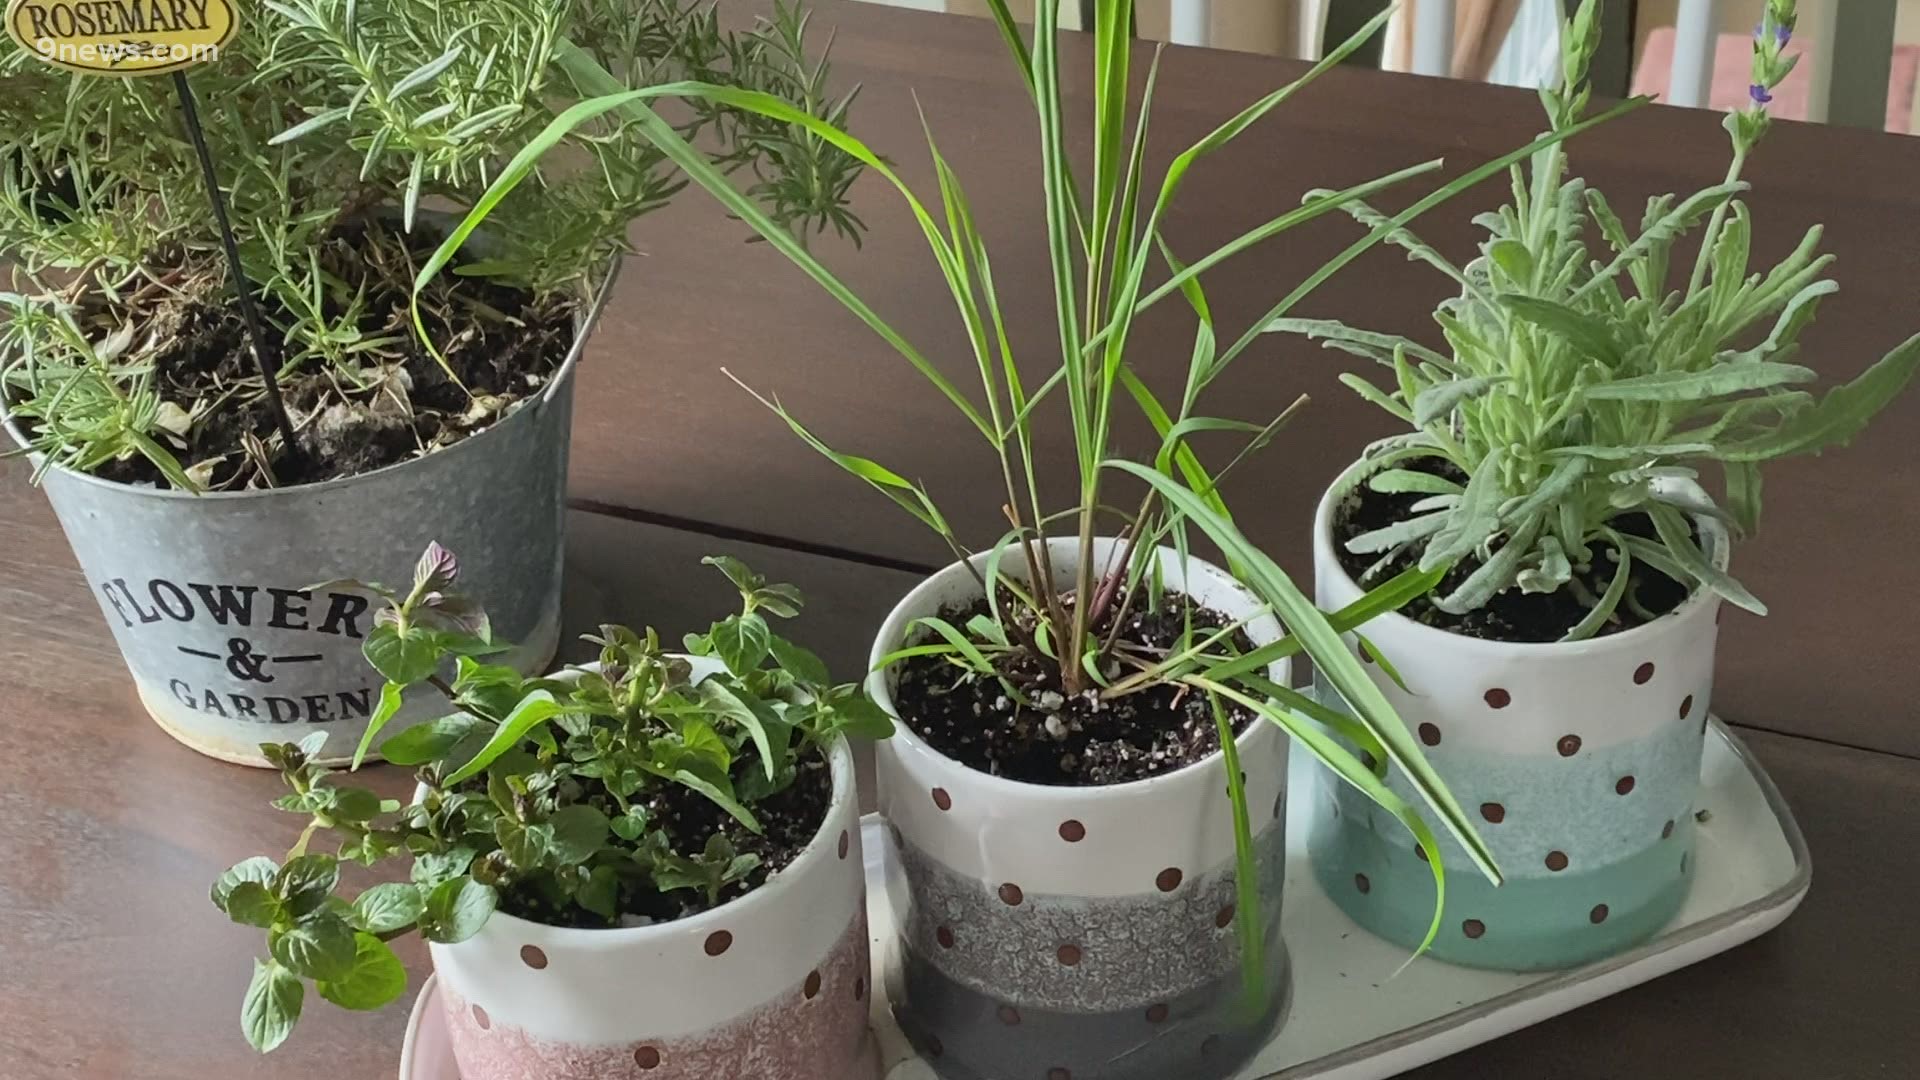 Start with some basics like rosemary, basil and mint. All are easy to grow and smell amazing!